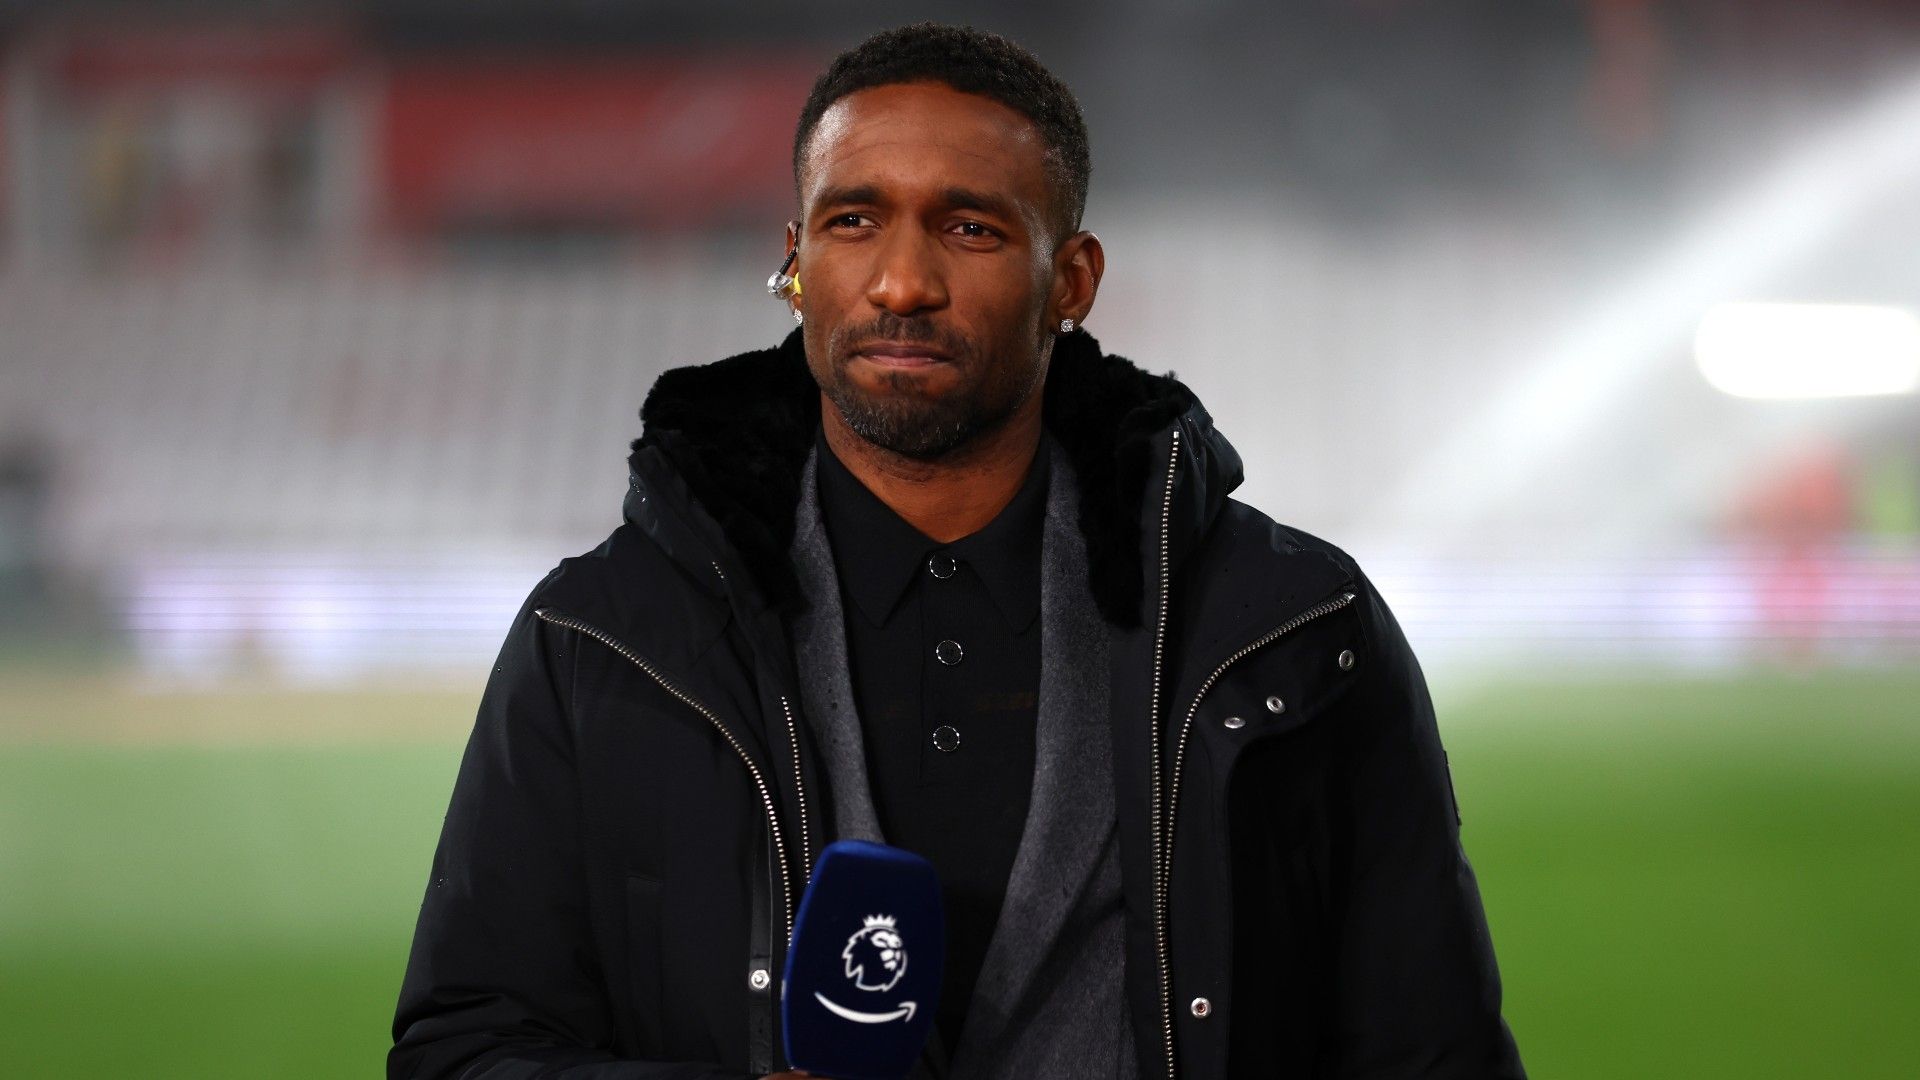 'Tottenham would be top of the Premier League!' - Jermain Defoe makes BIG Spurs claim as he insists only one thing has stopped them overhauling Arsenal & Man City